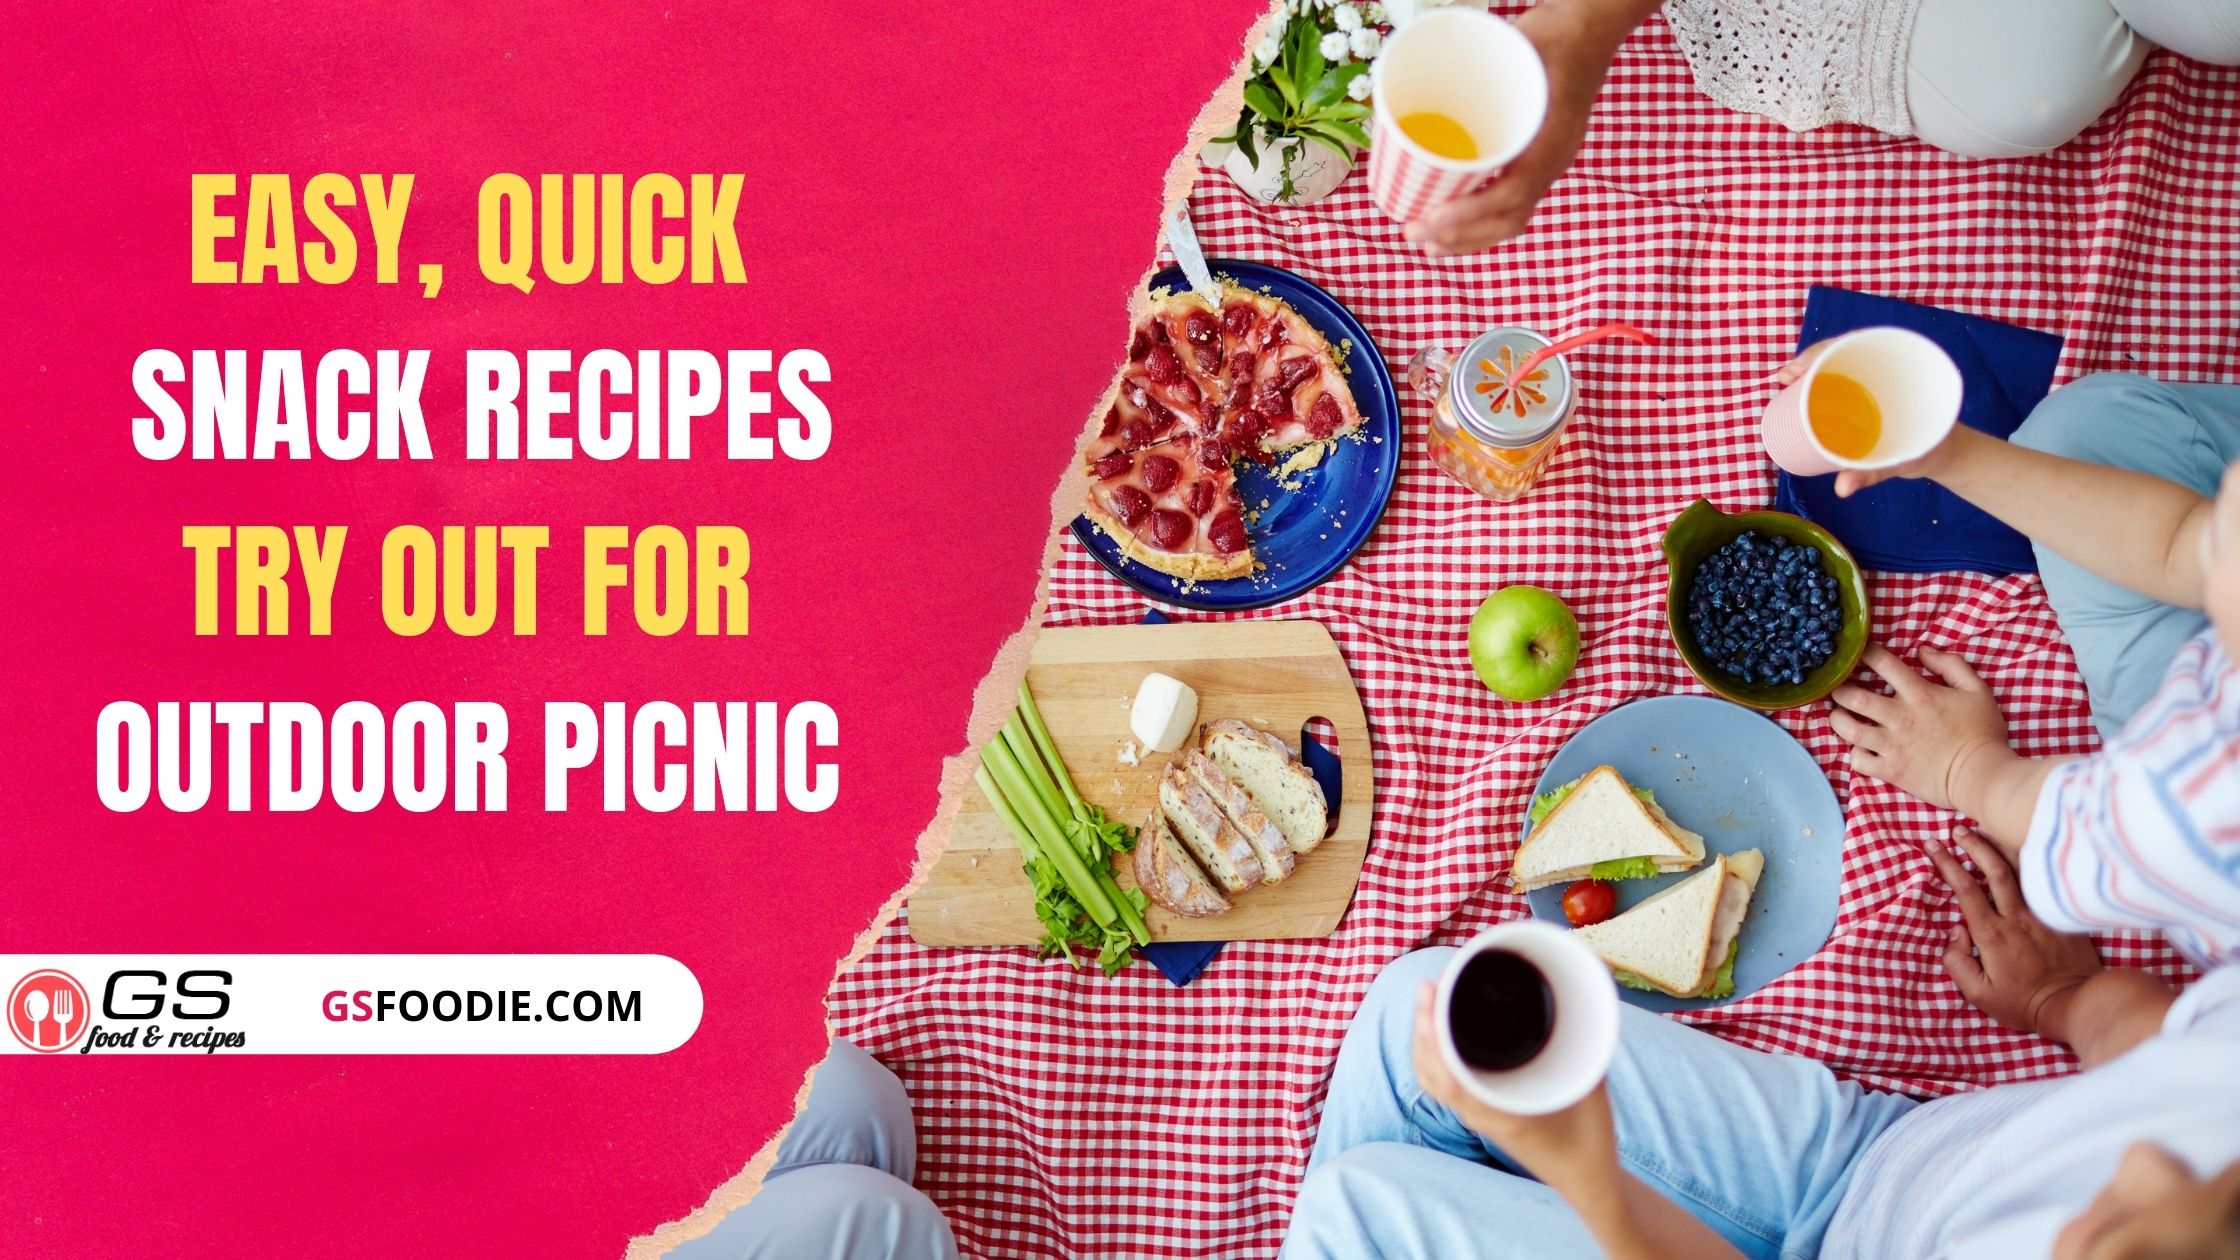 Easy, Quick Snack Recipes To Try Out For Outdoor Picnic | Food & Recipe